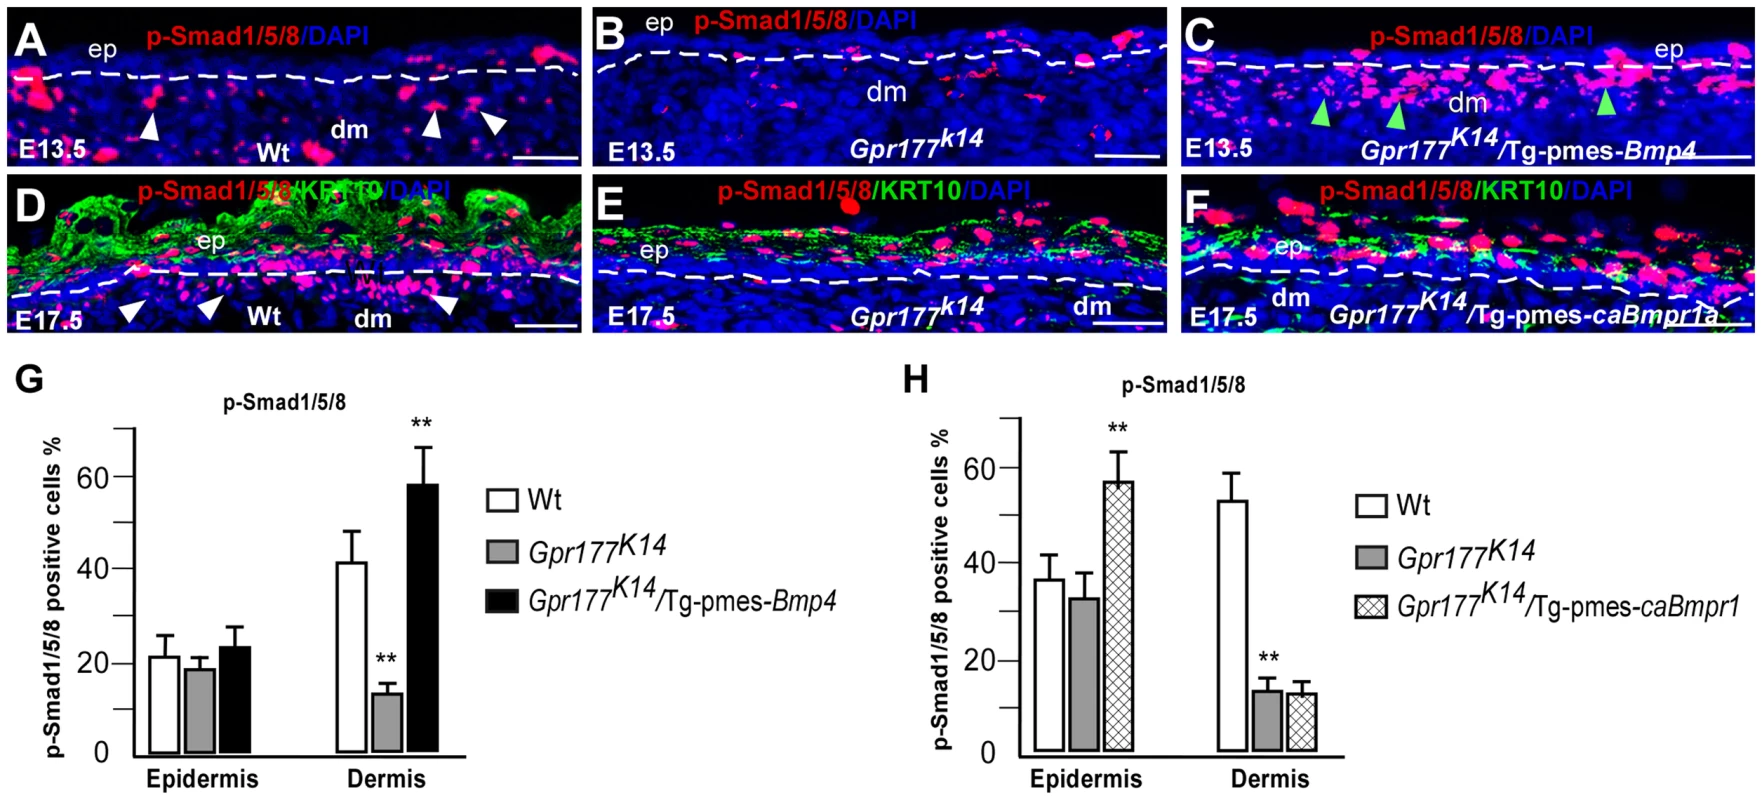 Transgenic pmes-<i>Bmp4</i> reactivates Smad1/5/8 signaling in the dermal mesenchyme in <i>Gpr177<sup>K14</sup></i>/Tg-pmes-<i>Bmp4</i>.